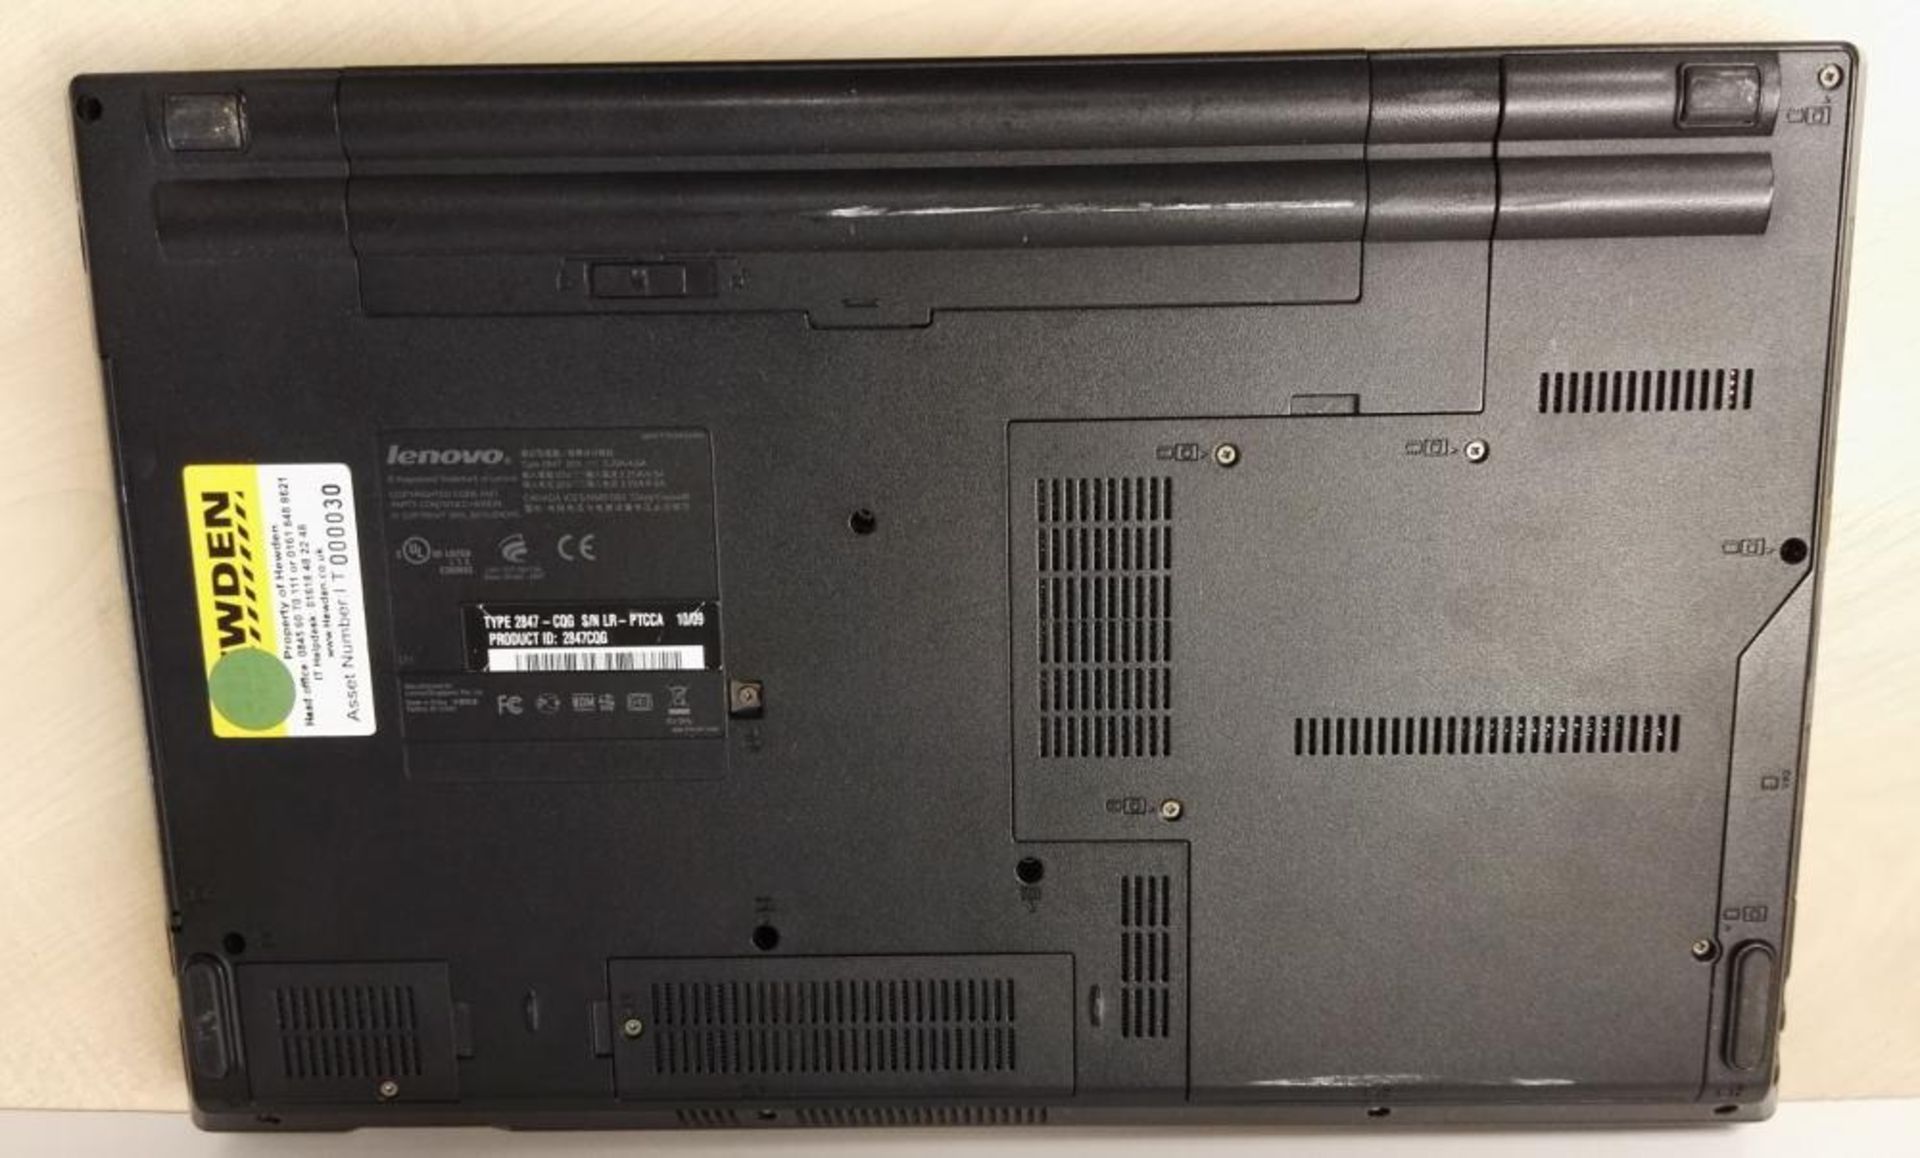 1 x Lenovo Thinkpad SL510 Laptop Computer - Features a 15.6 Inch Screen, Intel Core 2 Duo T6670 2.2g - Image 8 of 10